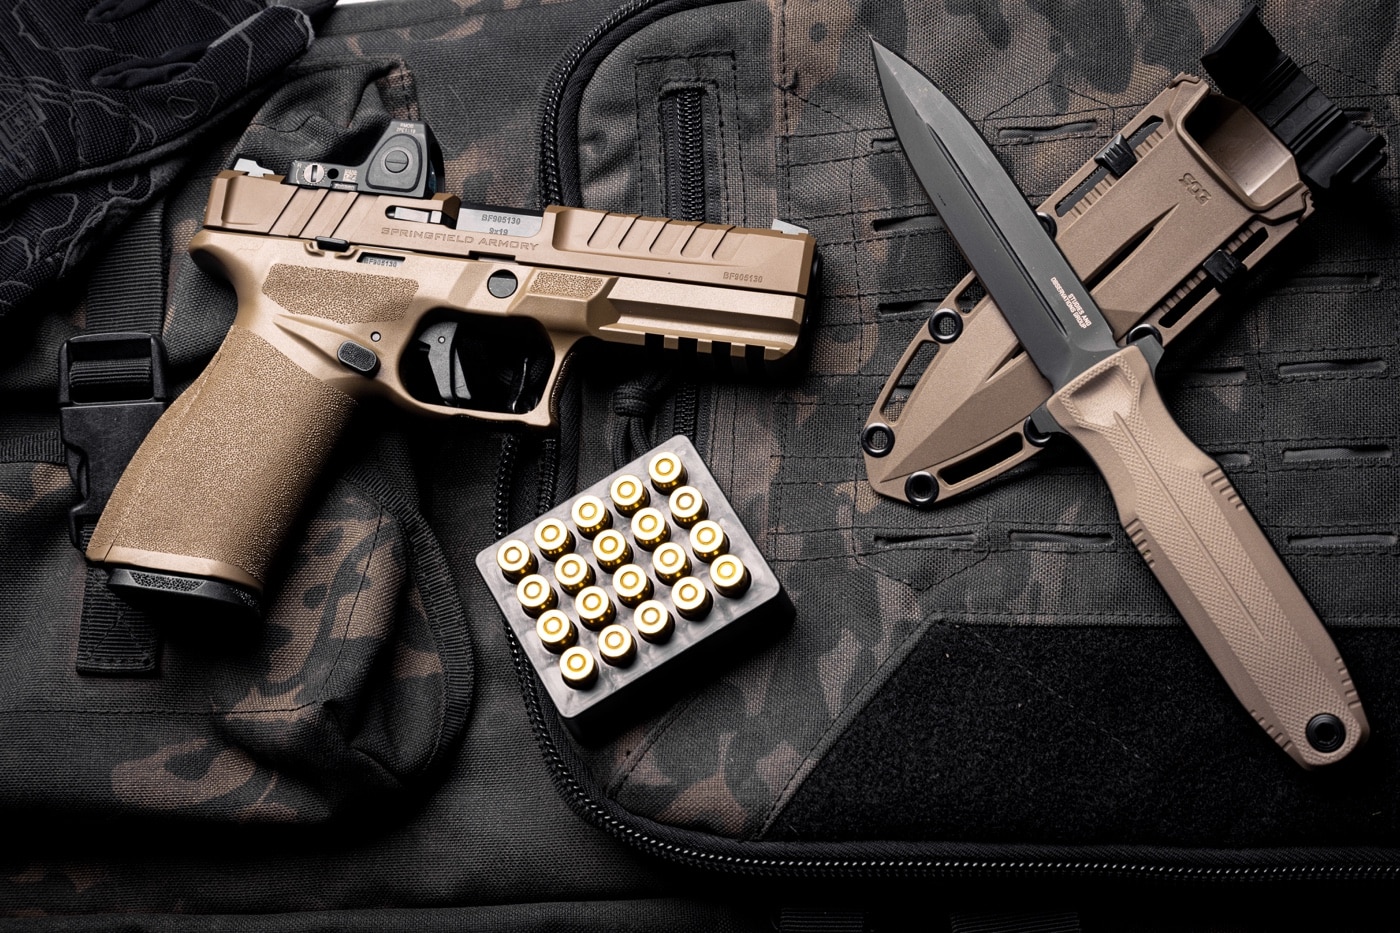 As designed, the Springfield Armory Echelon allows for the direct mounting of a large number of red dot sights. In this photo, we see a Trijicon RMR 2 sight mounted onto the slide of a Desert FDE Echelon.